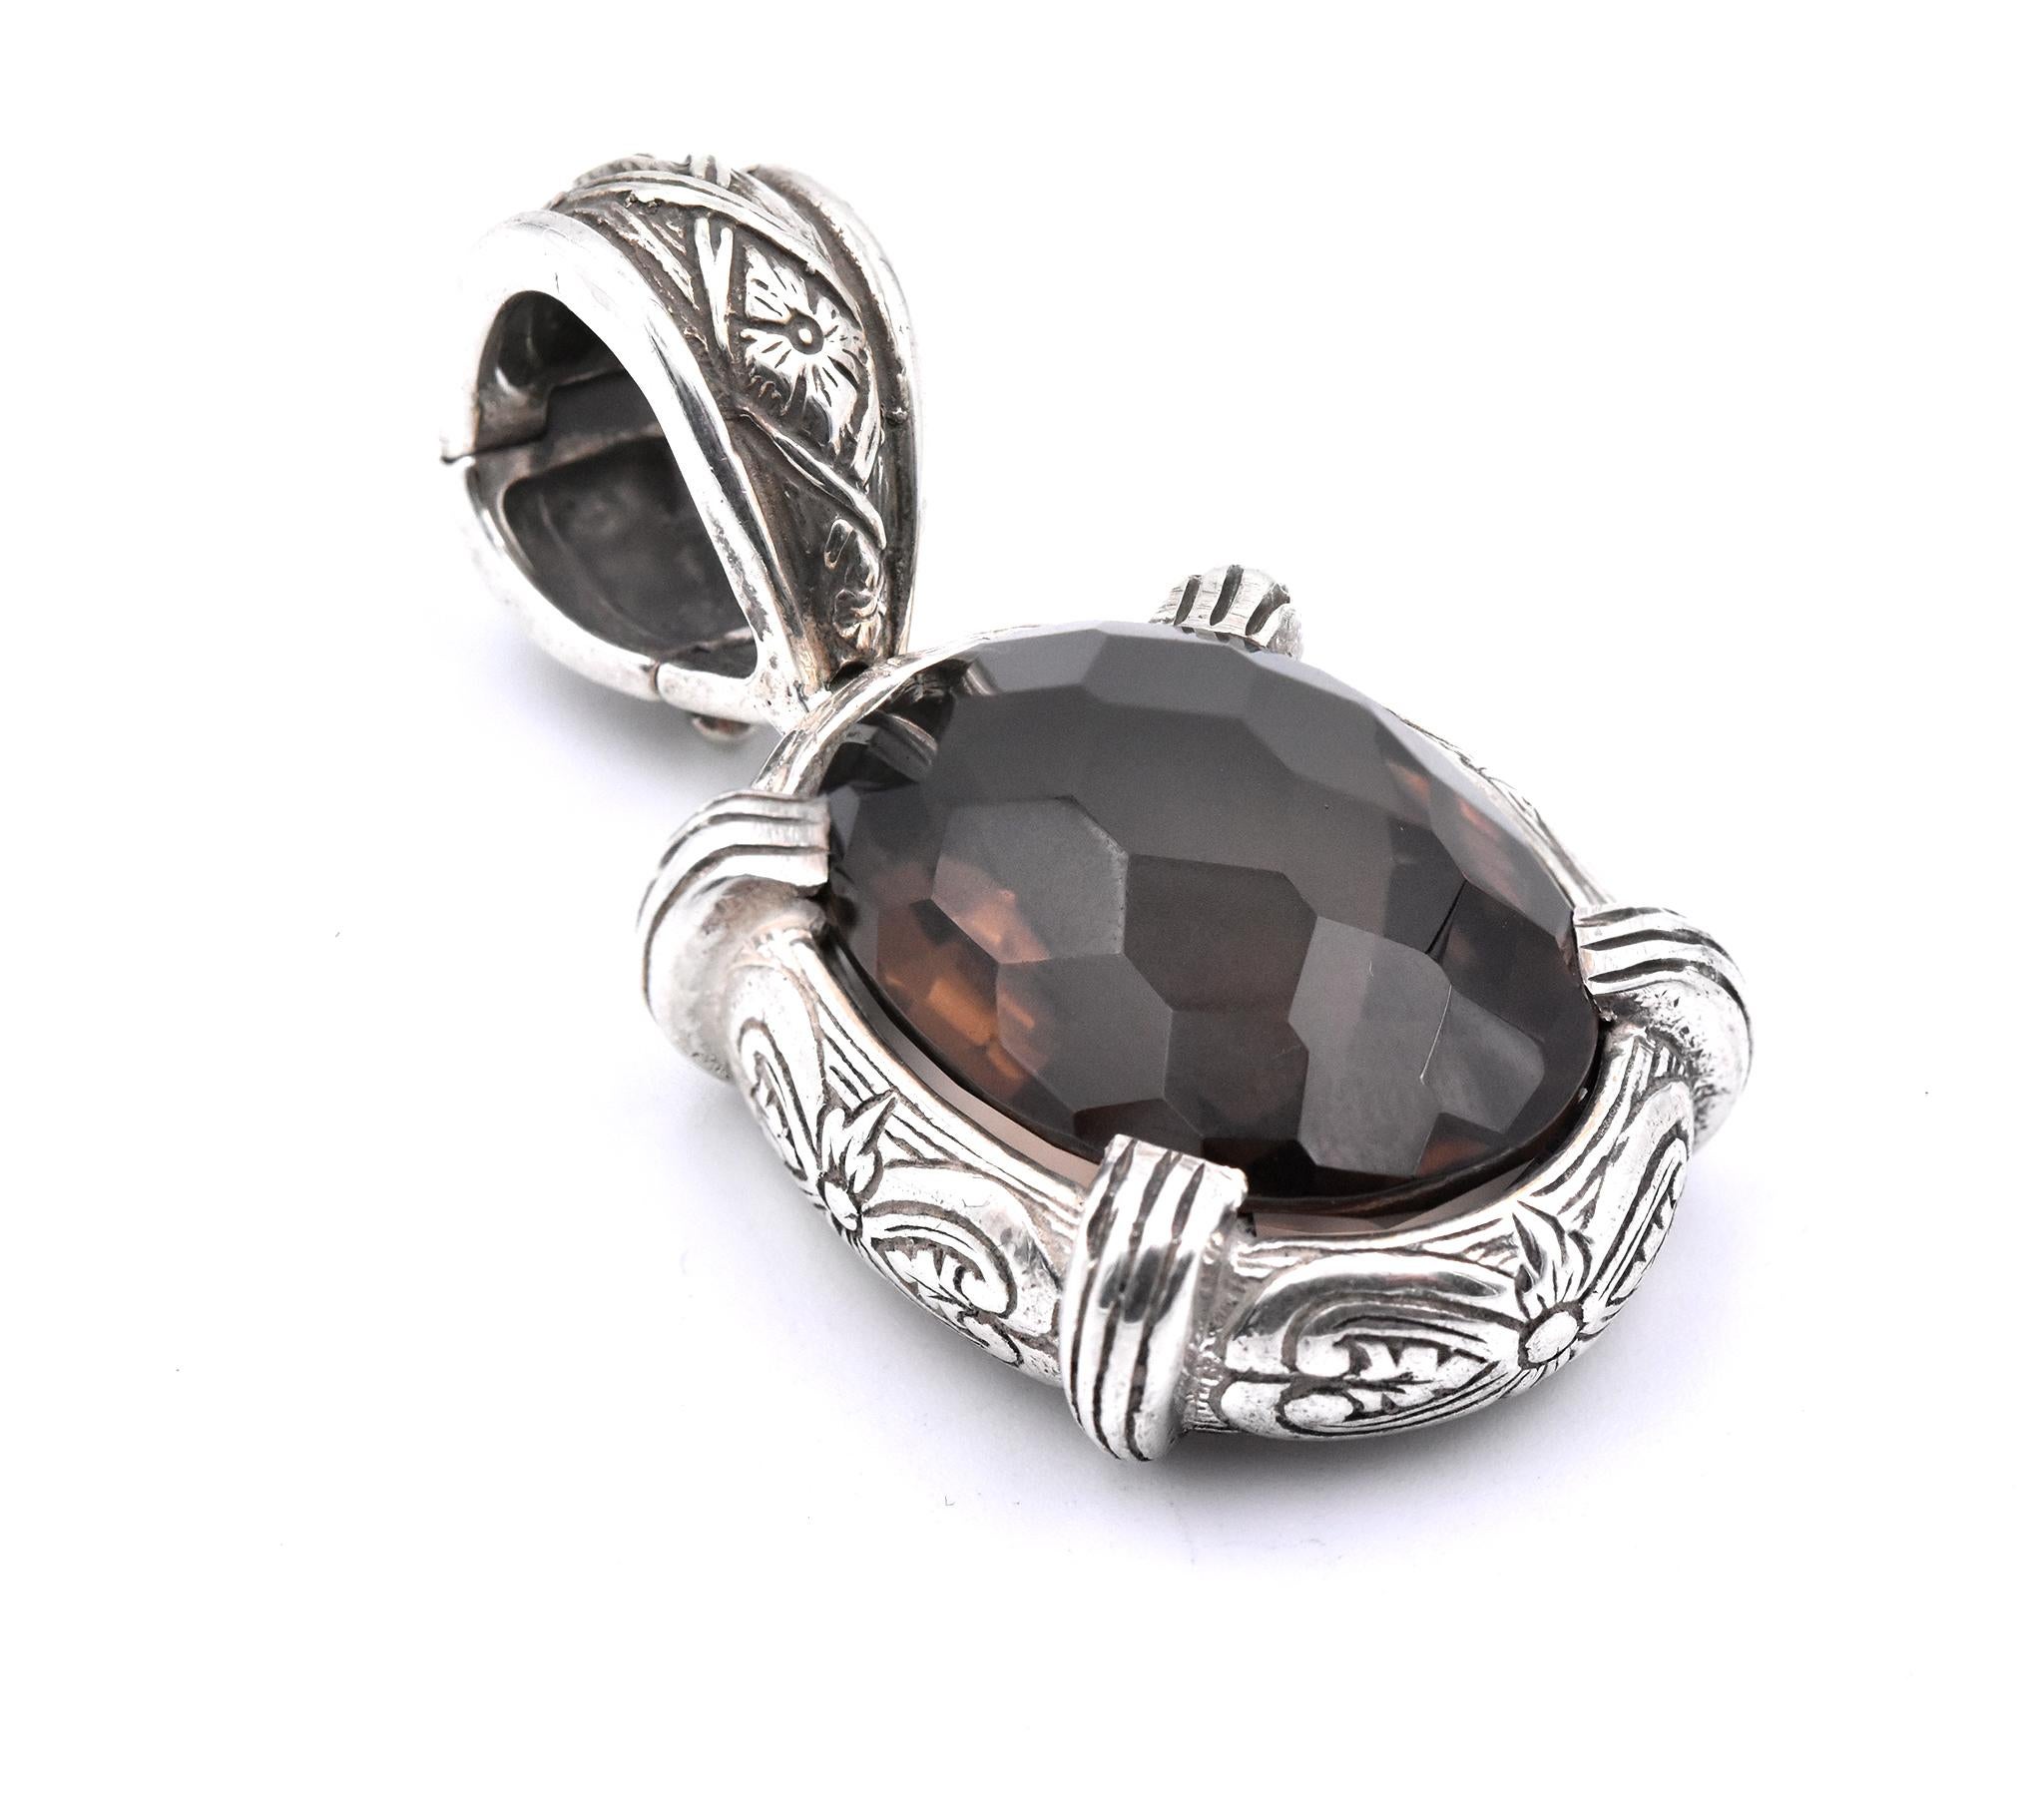 Designer: Stephen Dweck
Material: sterling silver
Gemstone: 1 oval faceted smoky topaz
Dimensions: pendant measures 48.80mm x 23.80mm
Weight: 24.82 grams	
